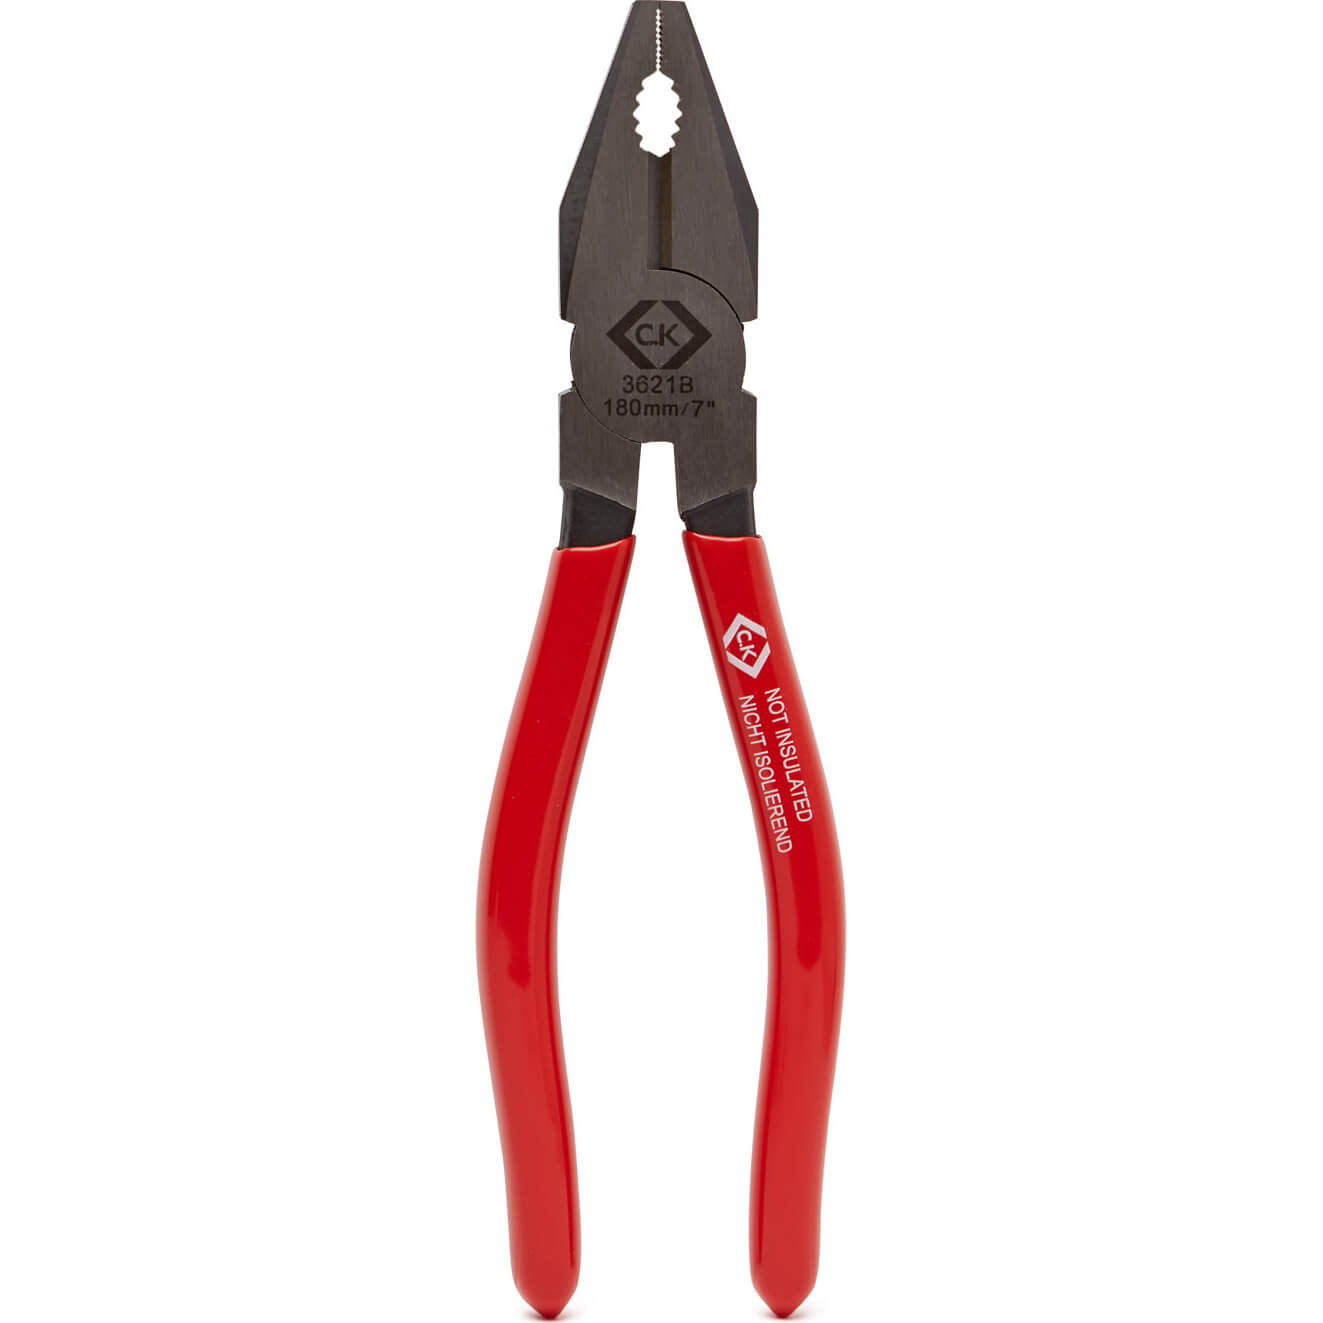 Image of CK T3621B Classic Combination Pliers 180mm